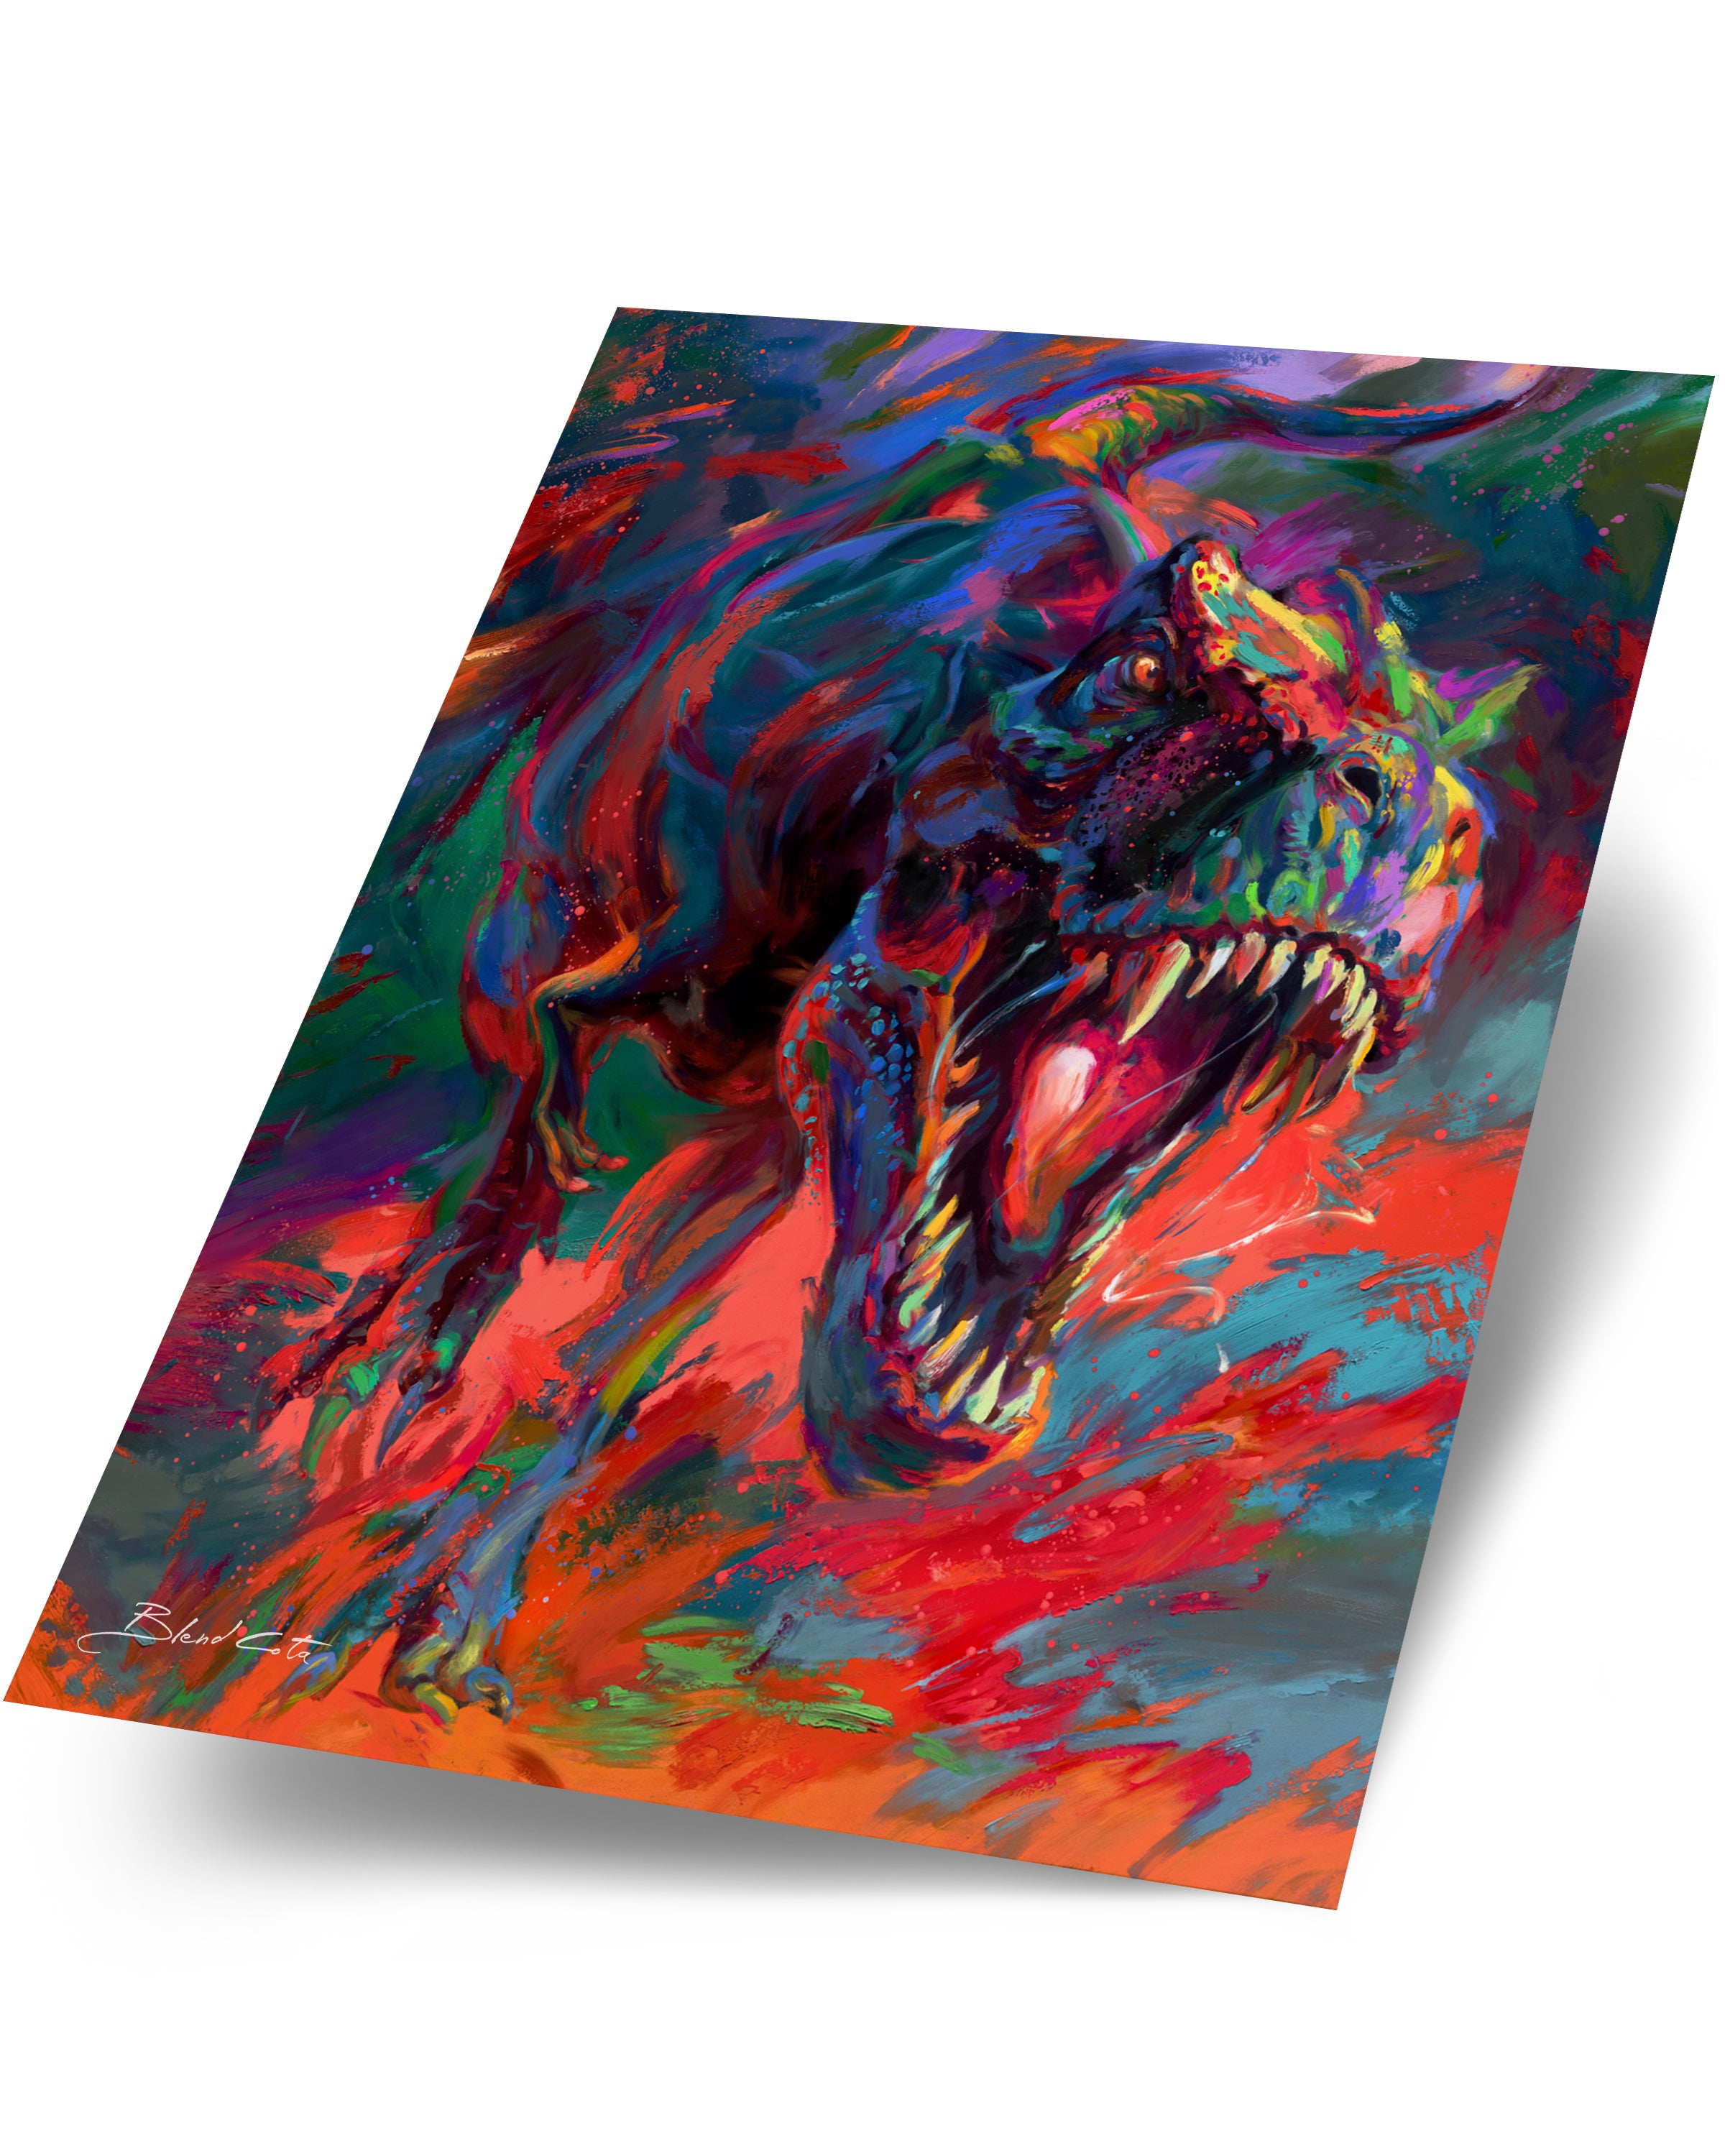 Art print on paper cardstock of the t-rex from jurassic period the apex dinosaur predator jaw full of teeth chasing you, painted with colorful brushstrokes in an expressionistic style.